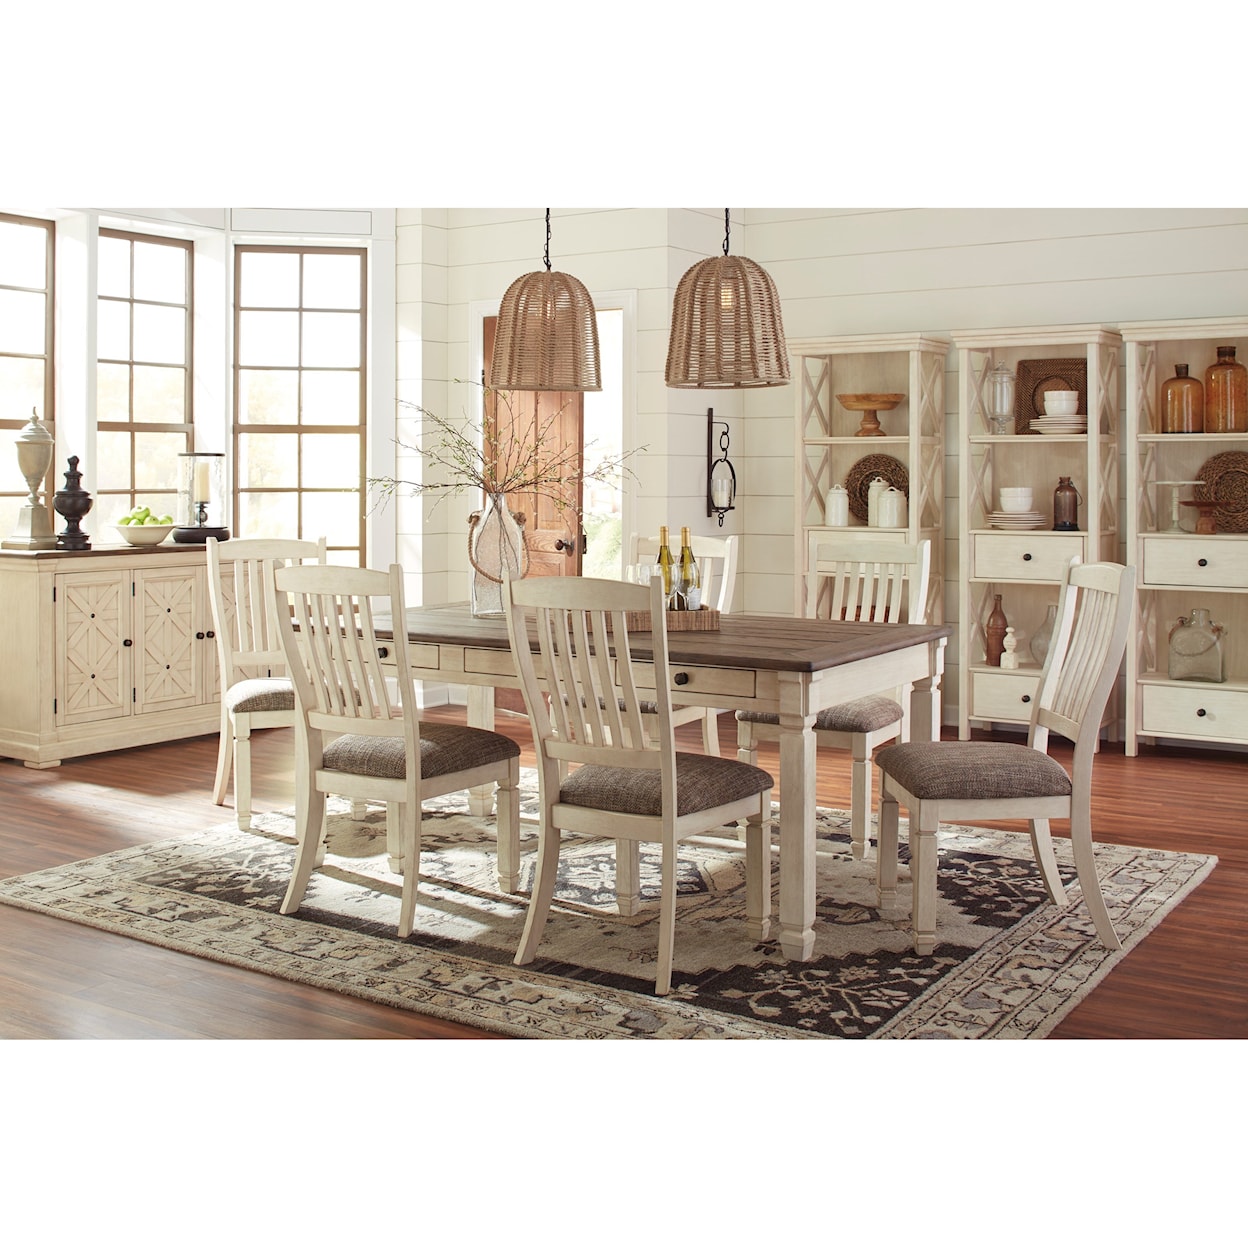 Michael Alan Select Bolanburg 7-Piece Table and Chair Set